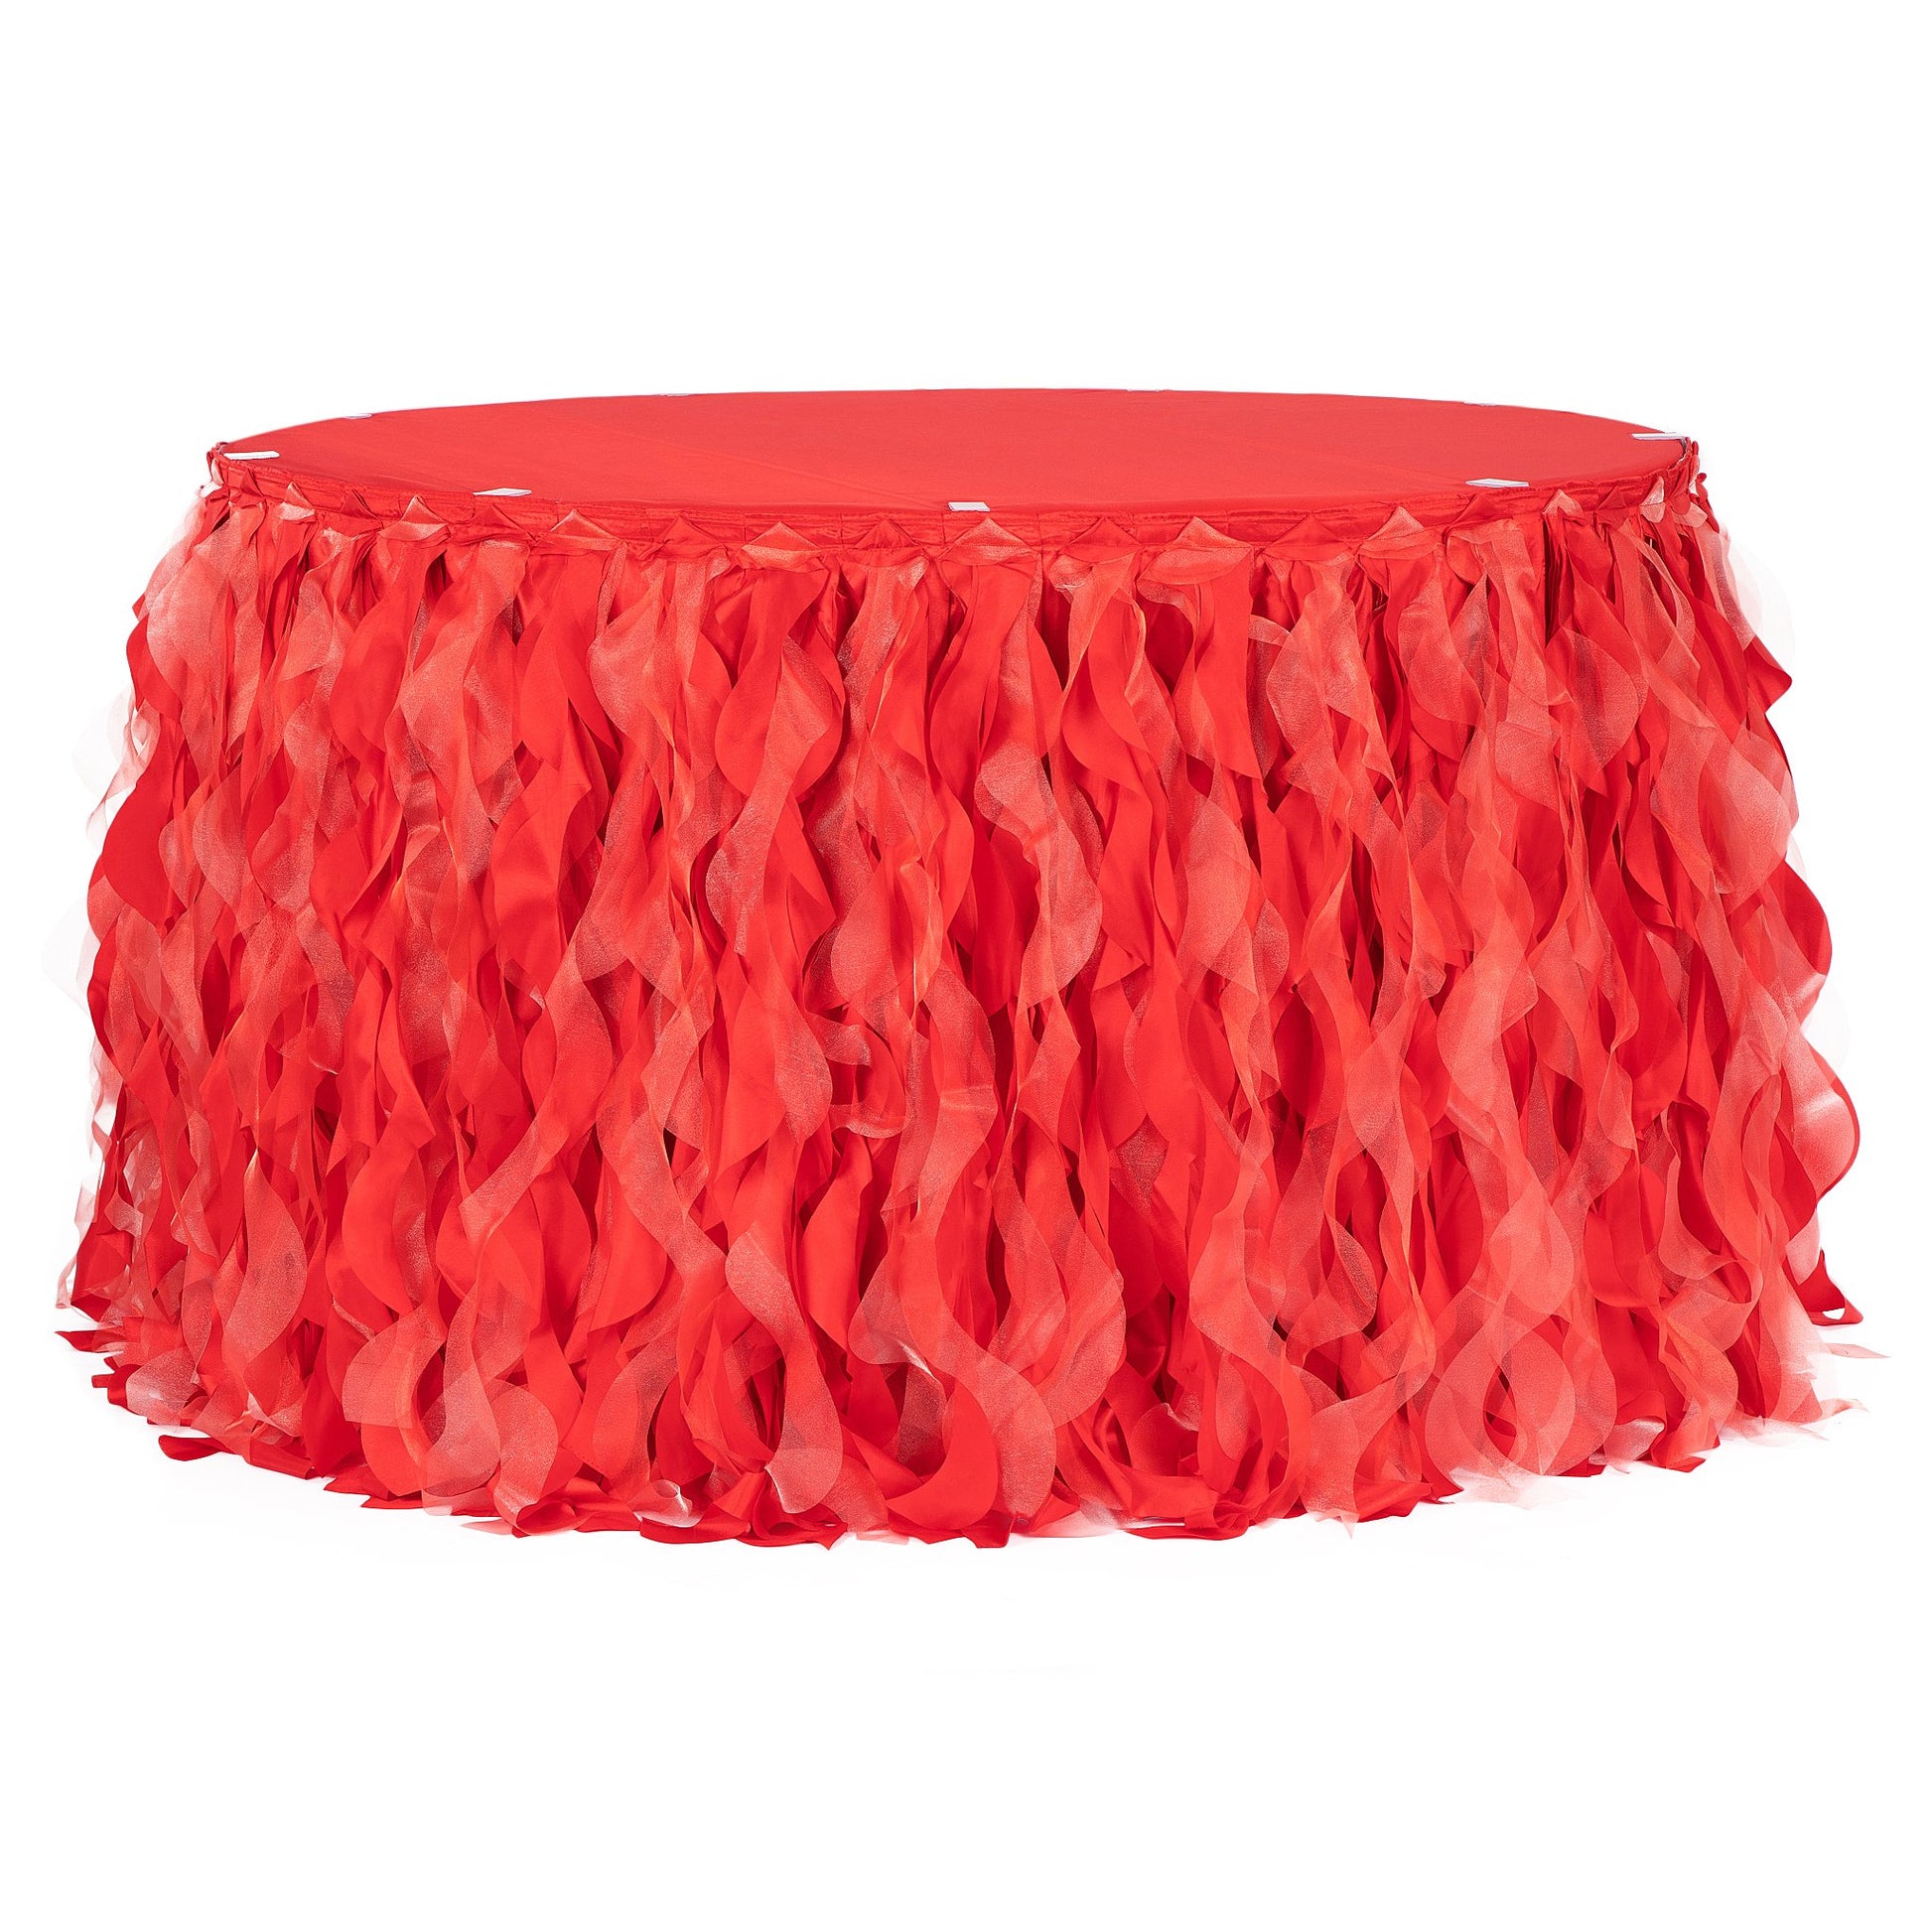 Curly Willow 17ft Table Skirt - Red - CV Linens